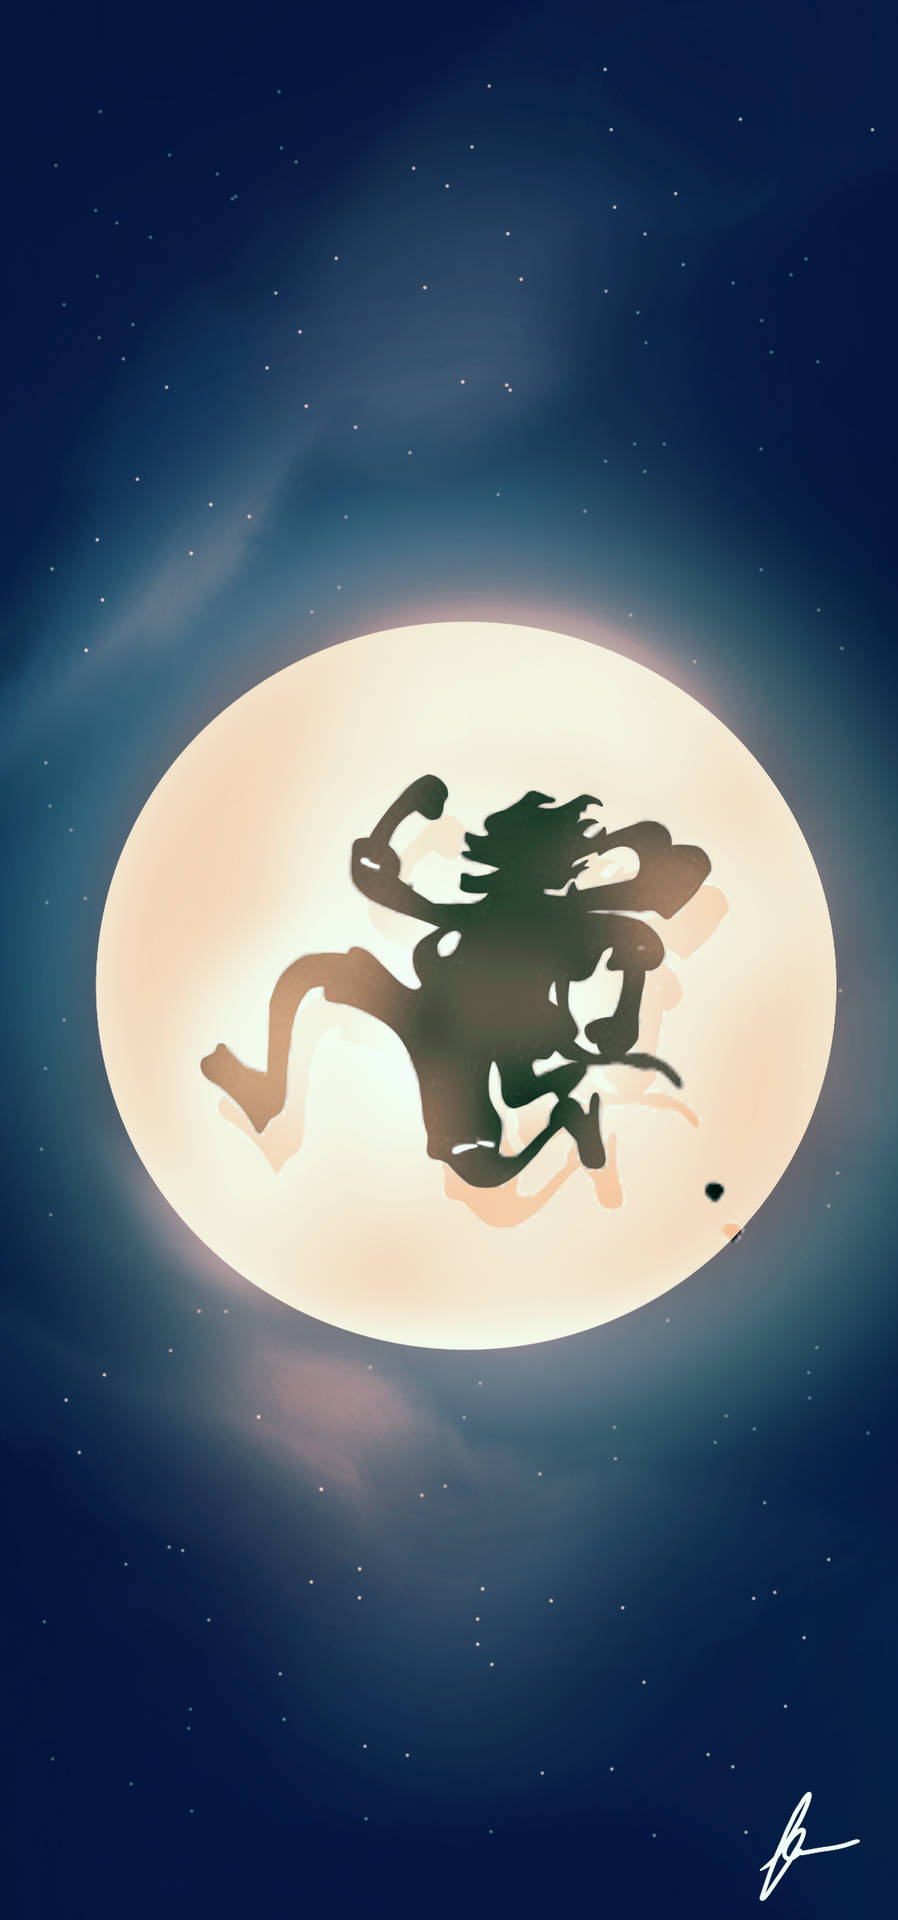 A Silhouette Of A Man In The Moon Wallpaper